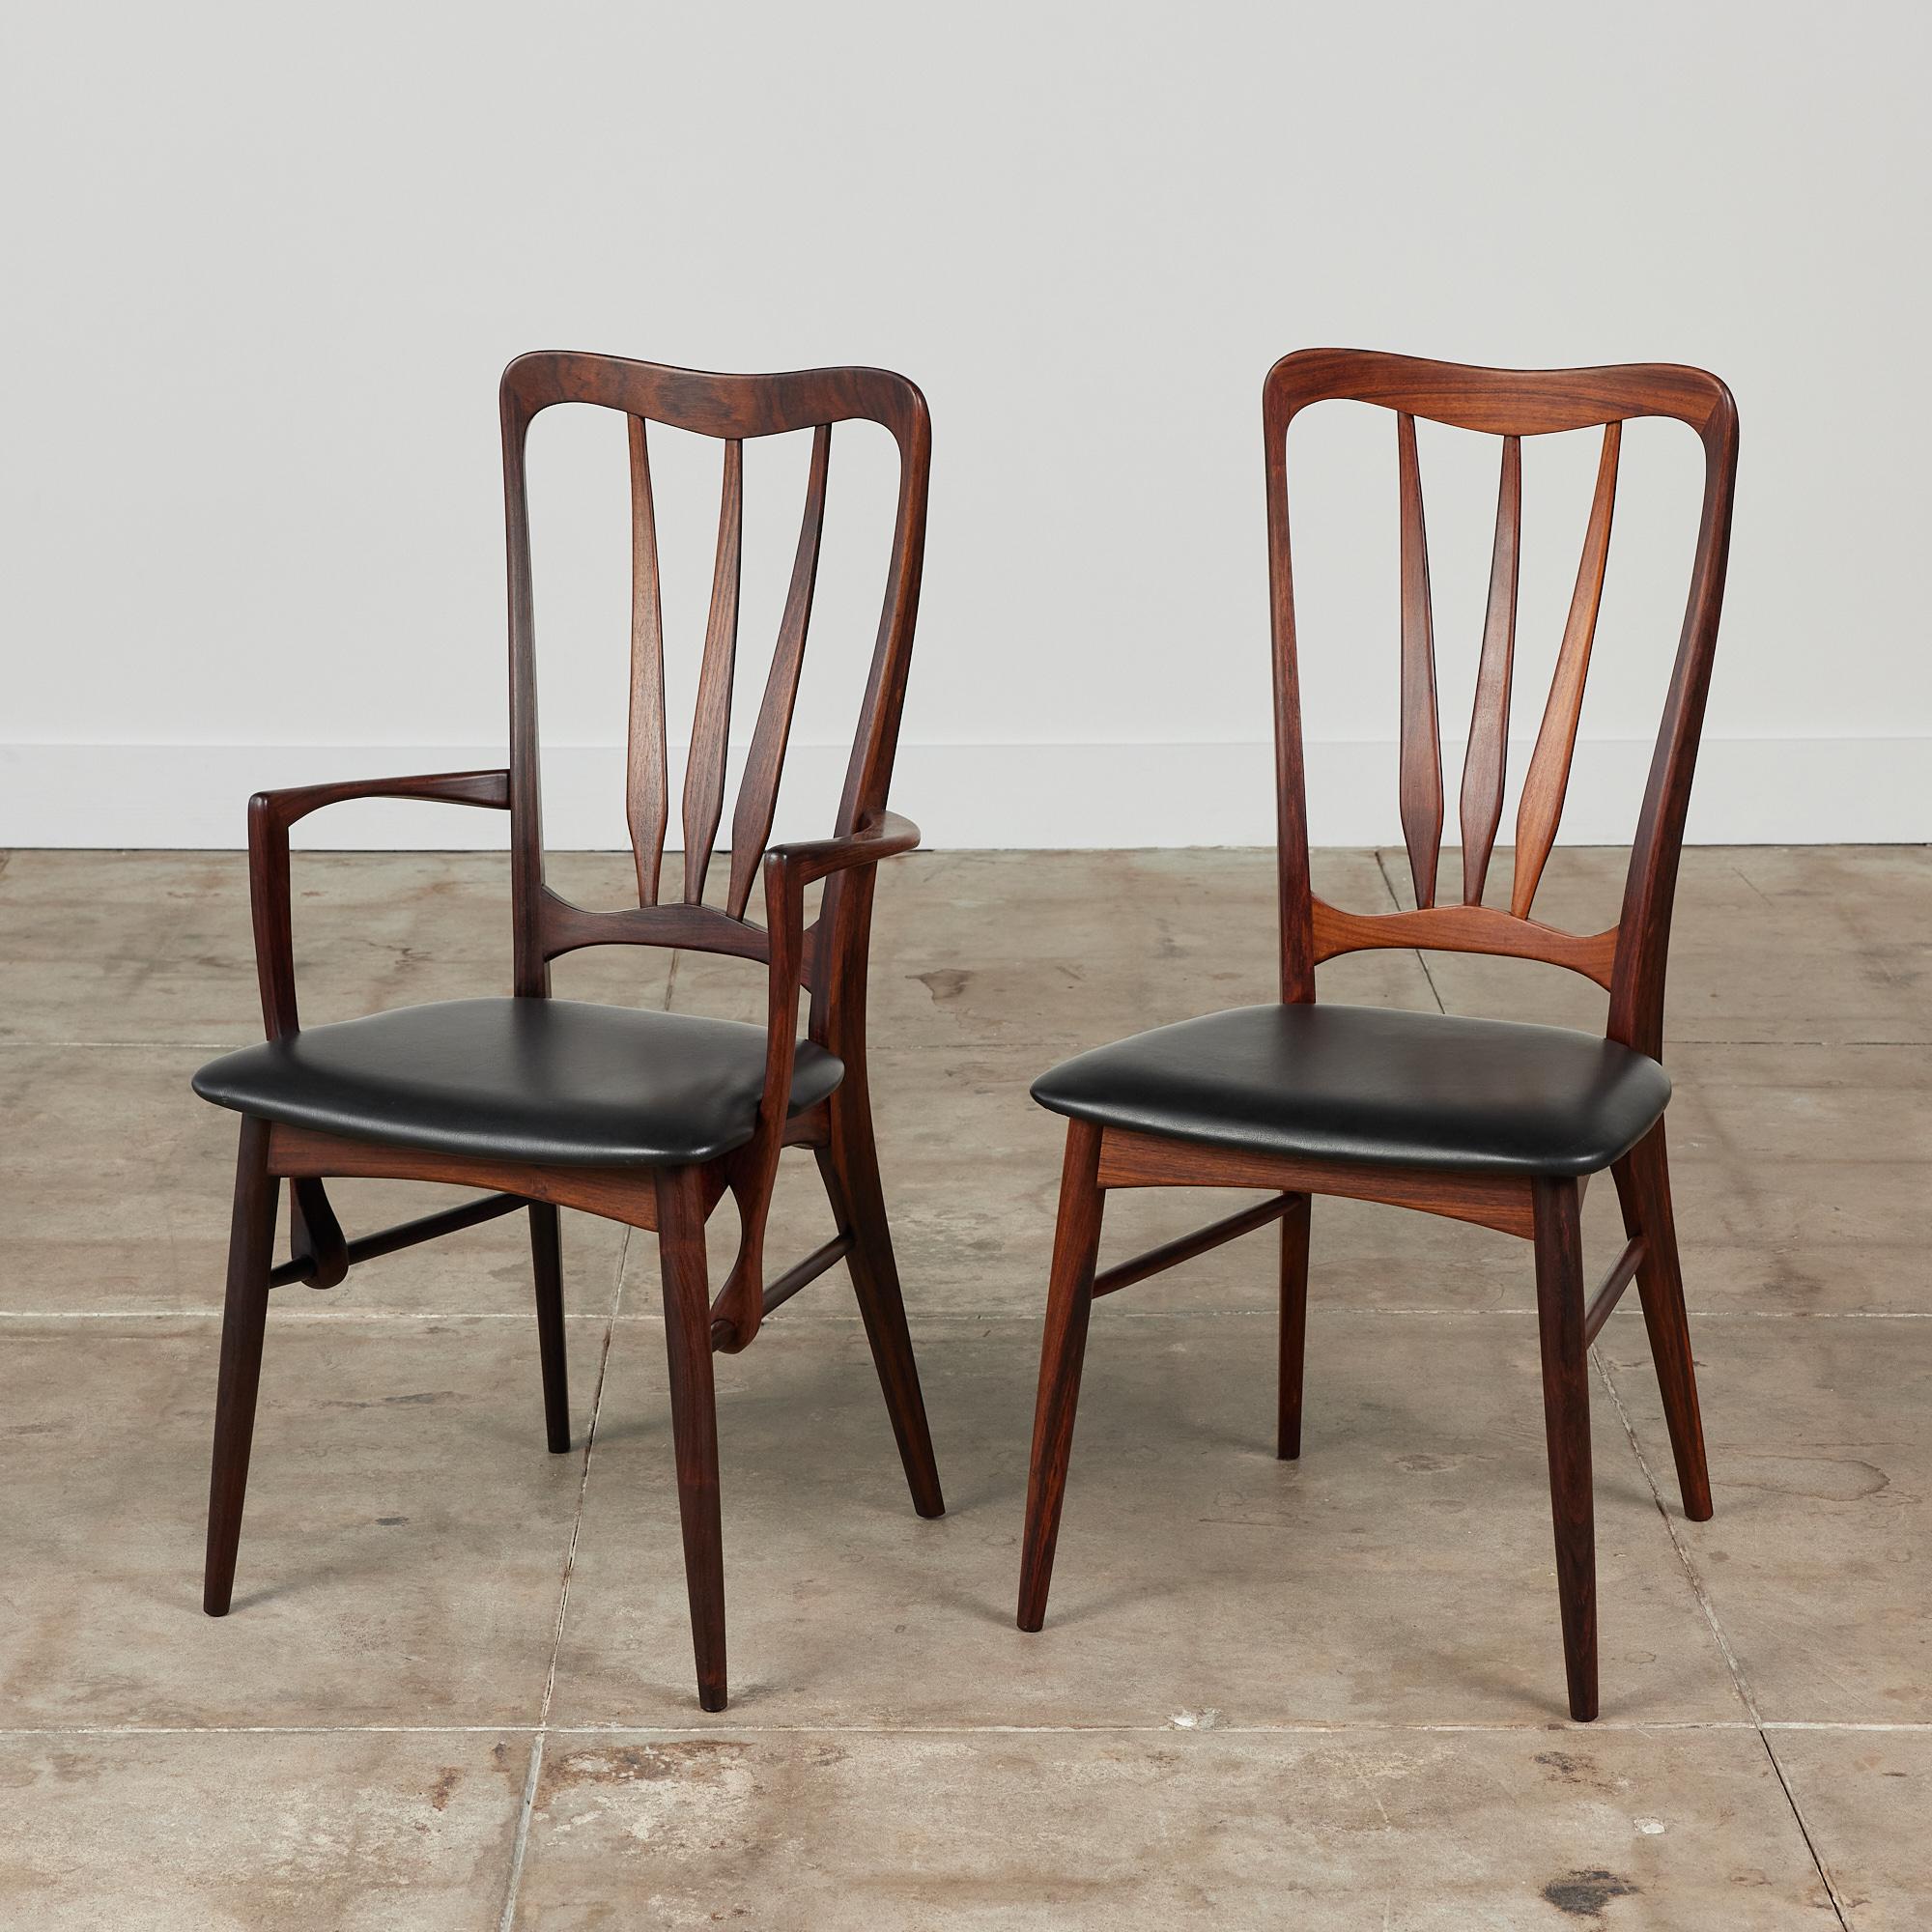 Naugahyde Set of Eight Rosewood Dining Chairs by Niels Koefoed for Koefoeds Hornslet